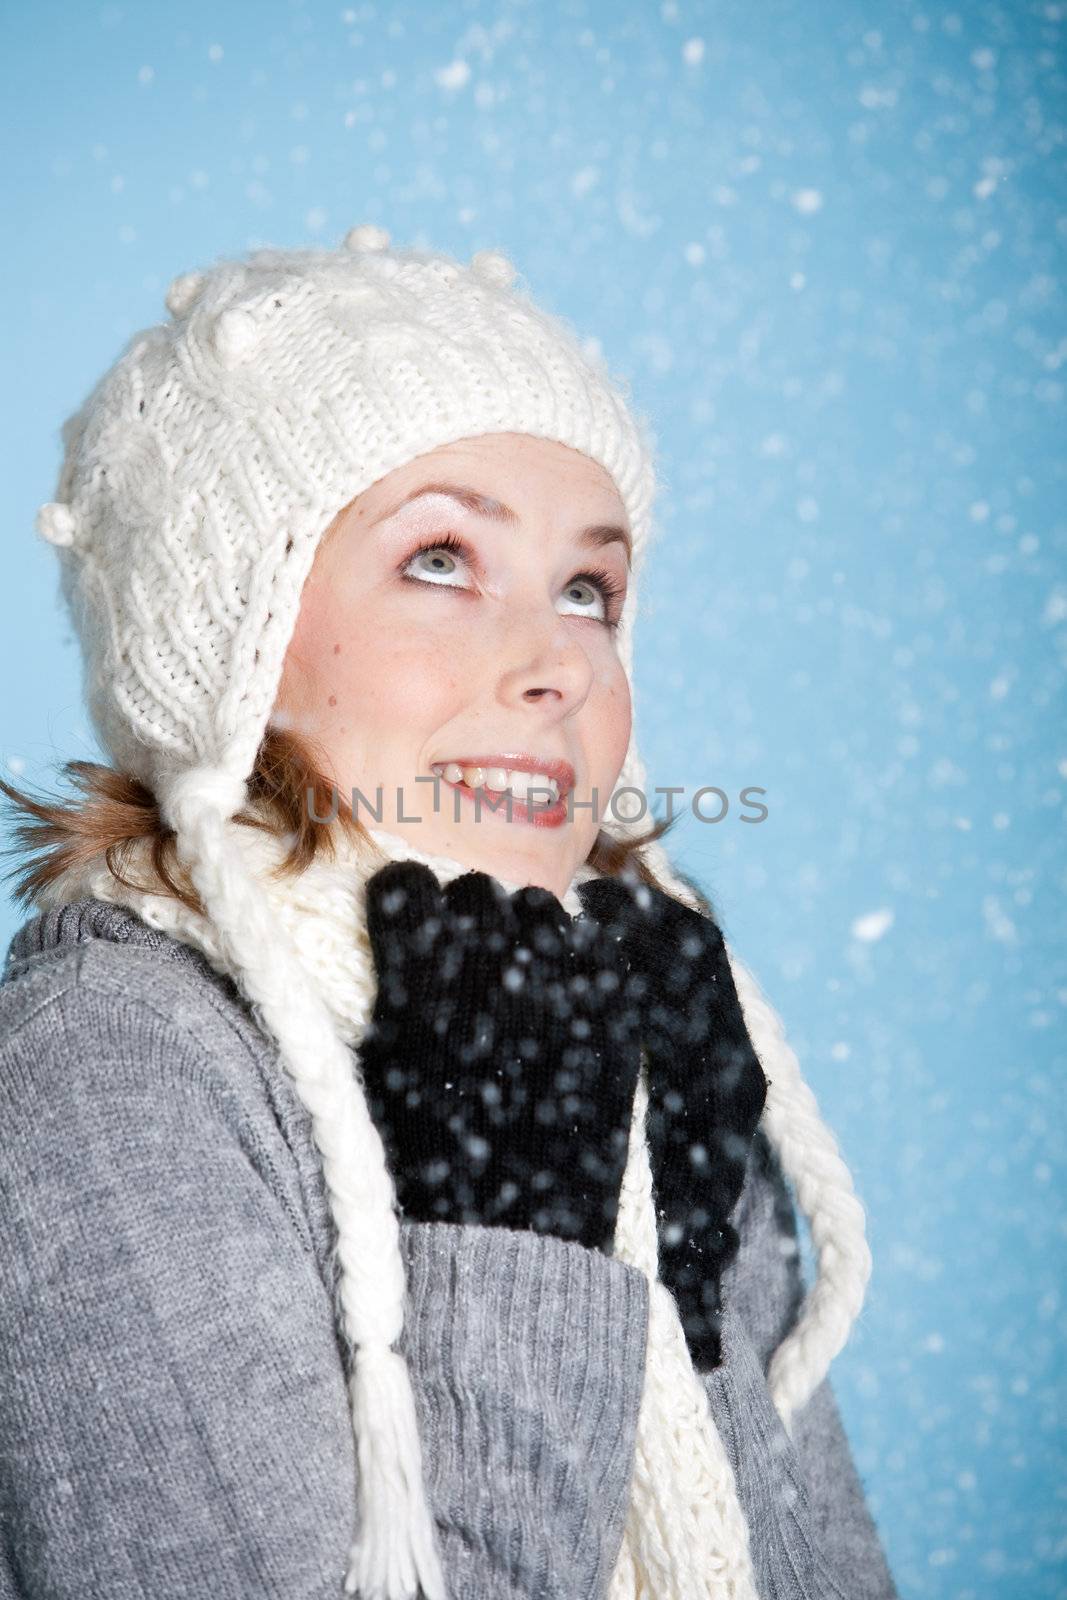 Happy blond girl warmly wrapped up looking up at the snow